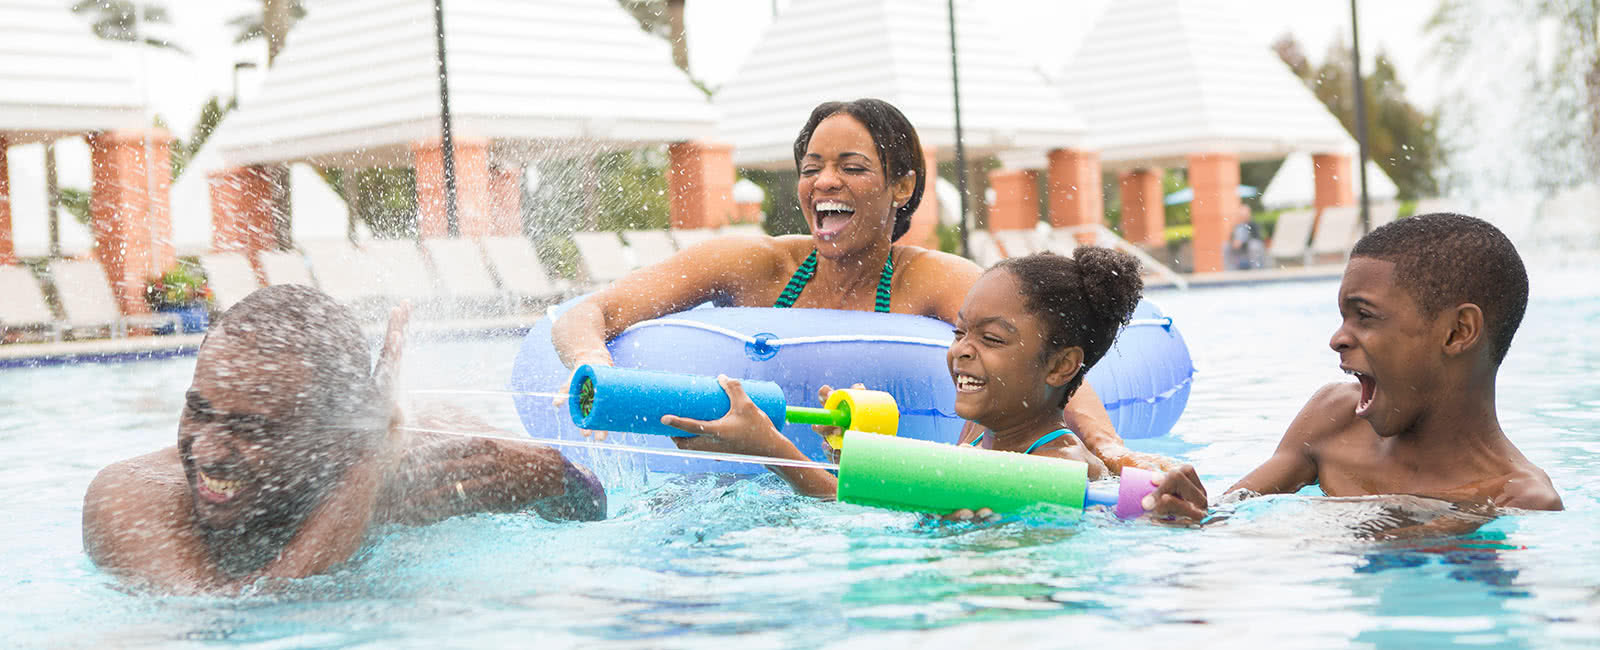 Enjoy a family vacation in Orlando, Florida with Hilton Grand Vacations